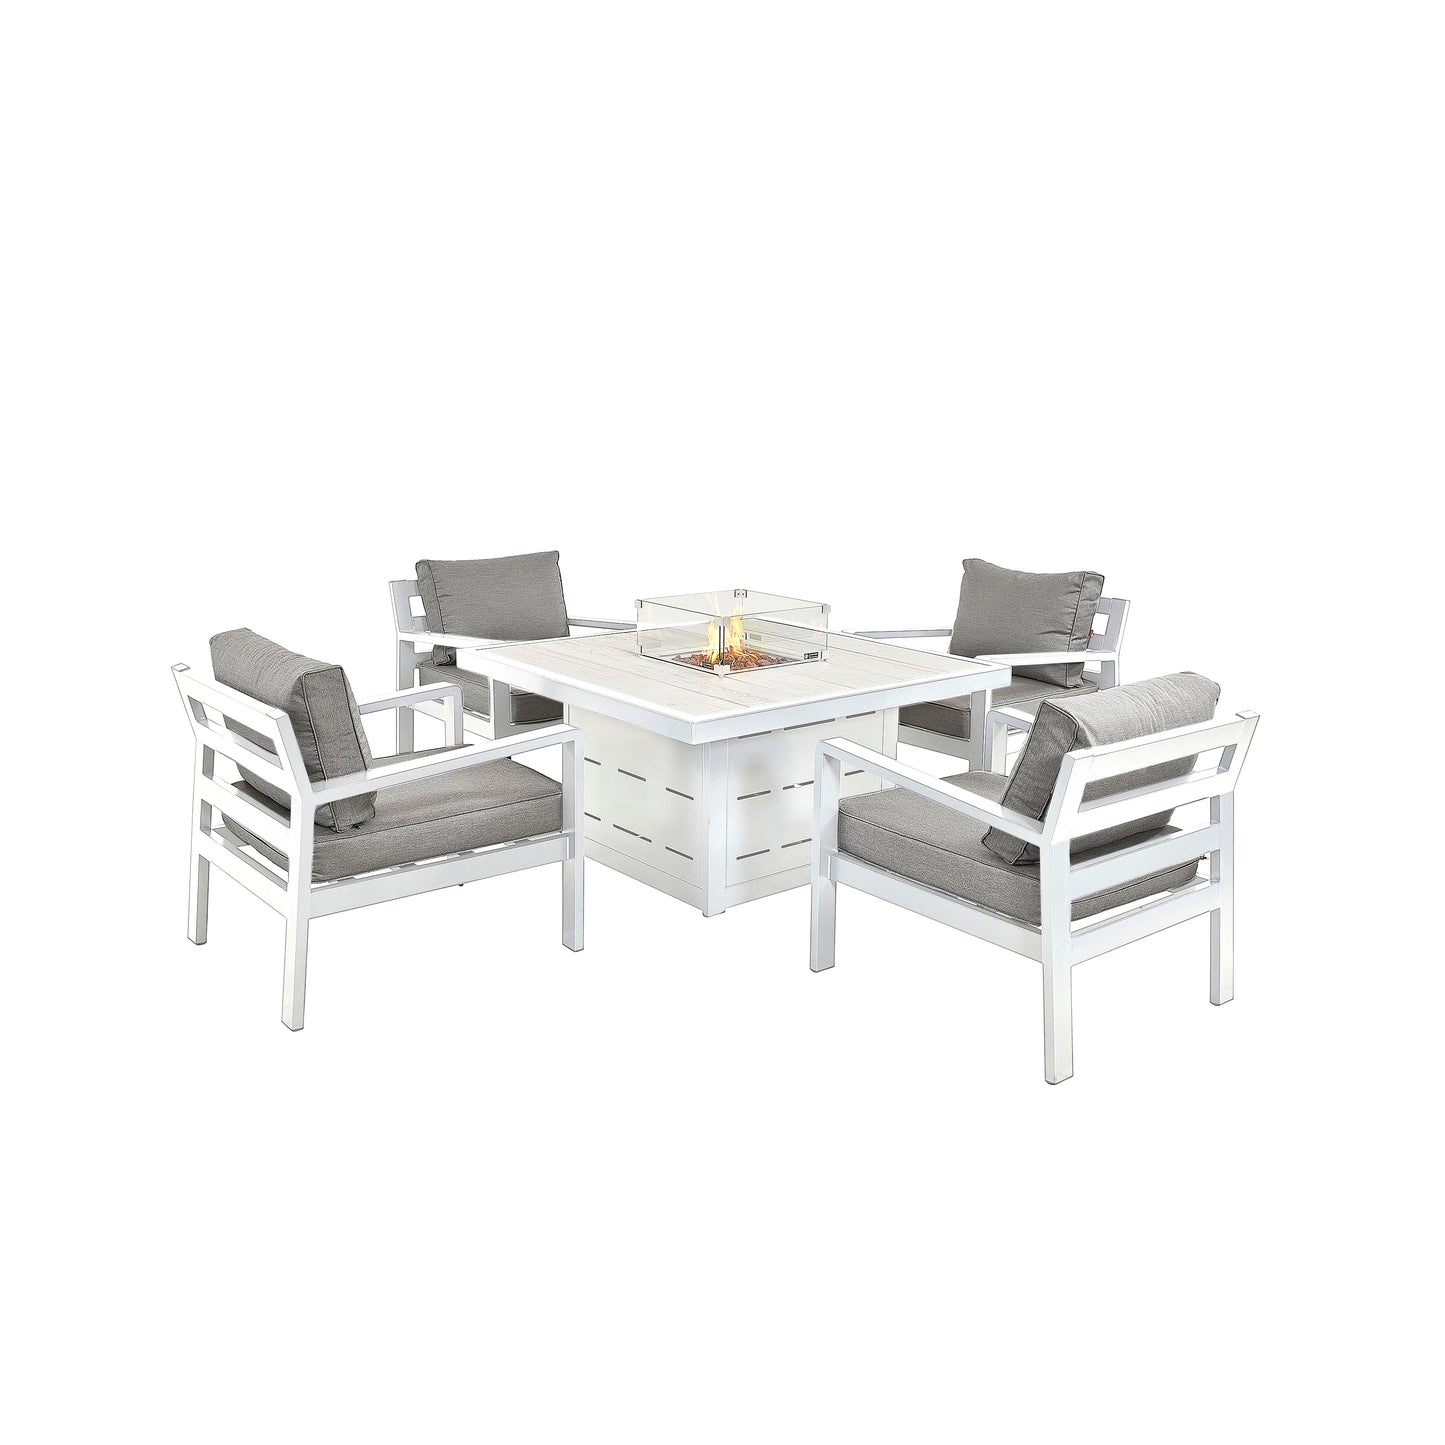 HEX Living - Tutbury Fire Pit Table Garden Set with Four Chairs